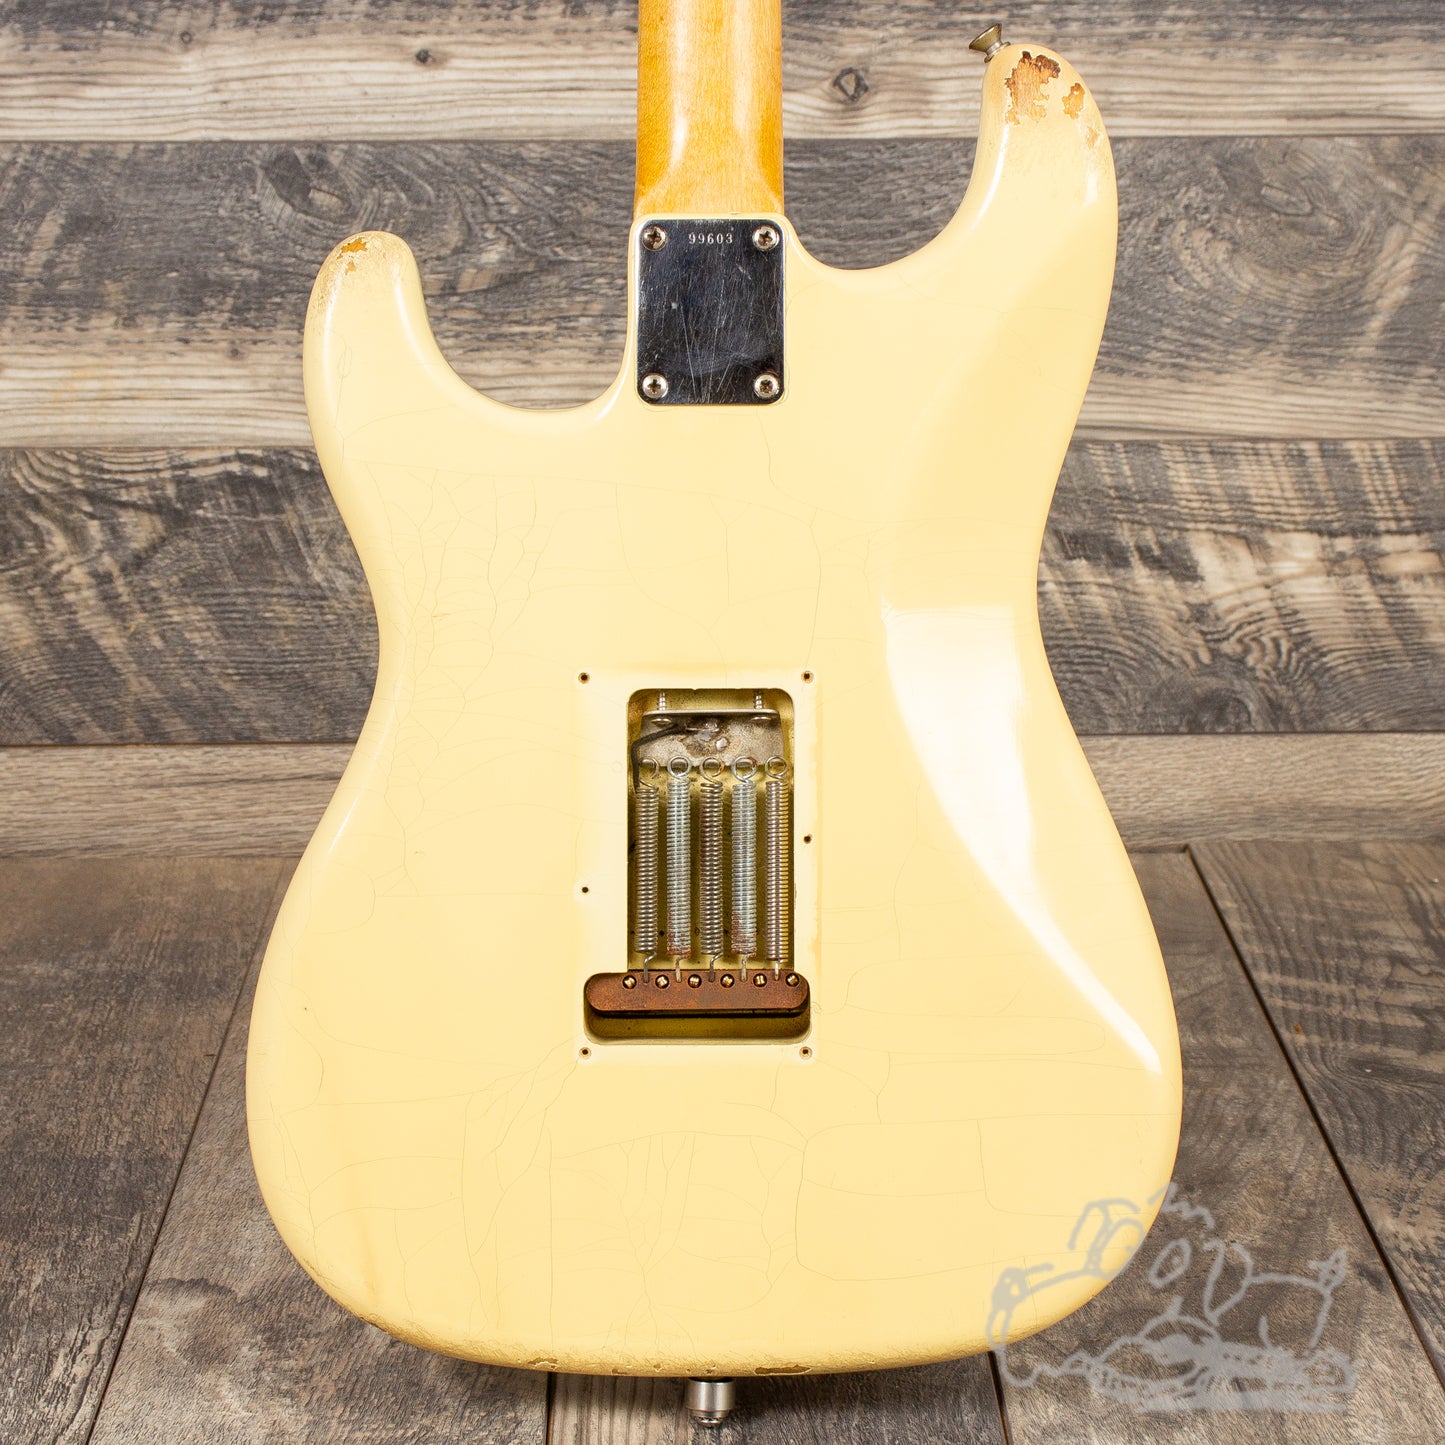 1963 Fender Stratocaster - Refinished in Olympic White